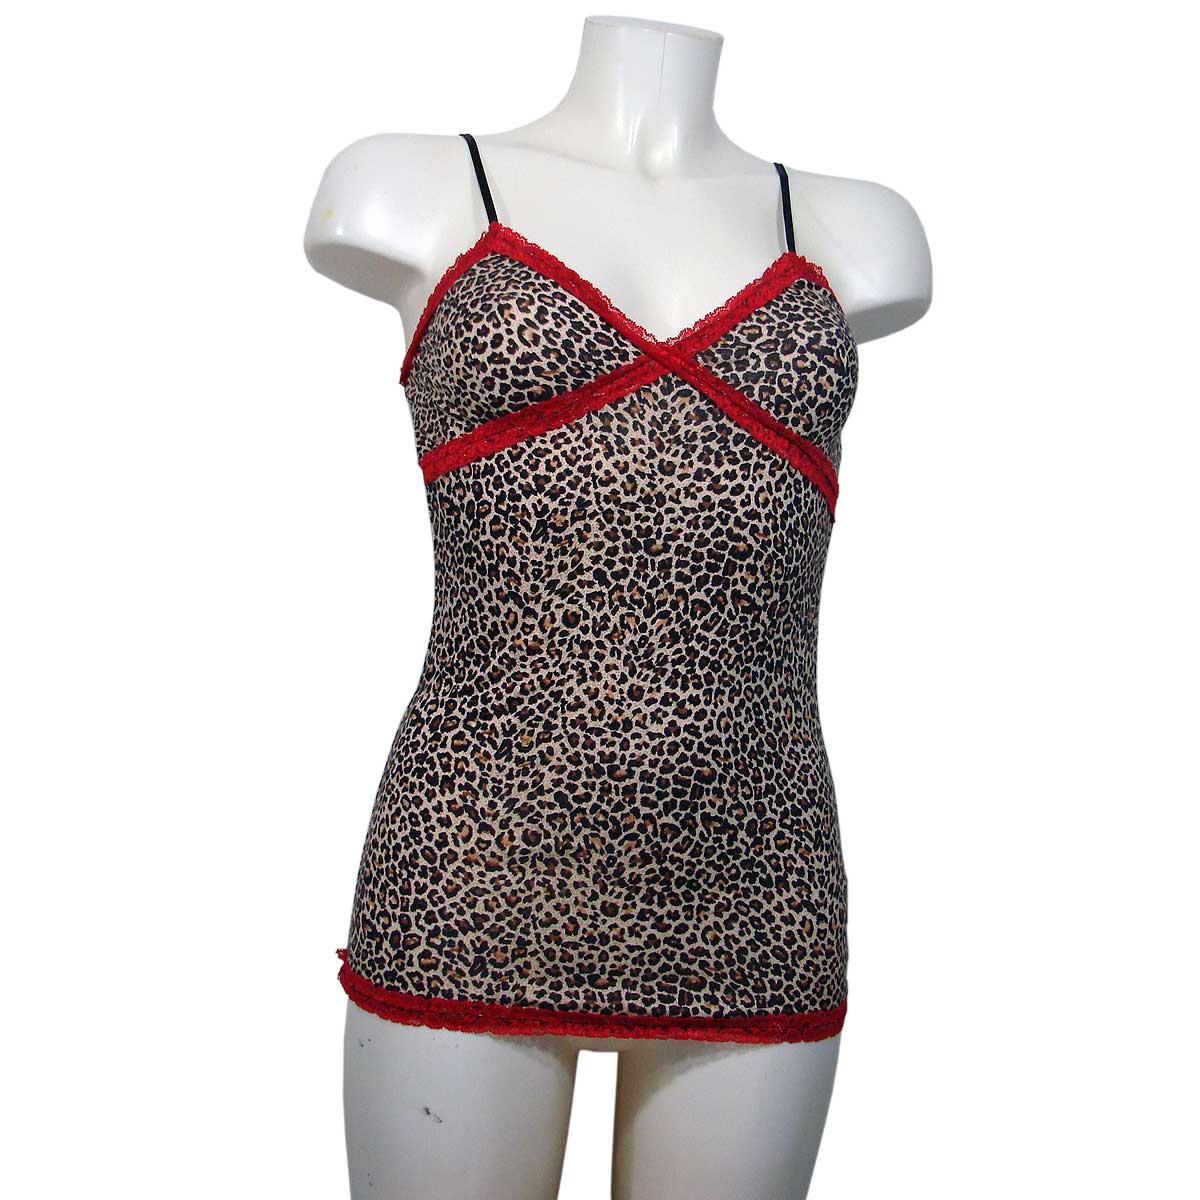 Woman's Leopard Spaghetti Strap Top By Queen of Darkness - Another Way Of Life